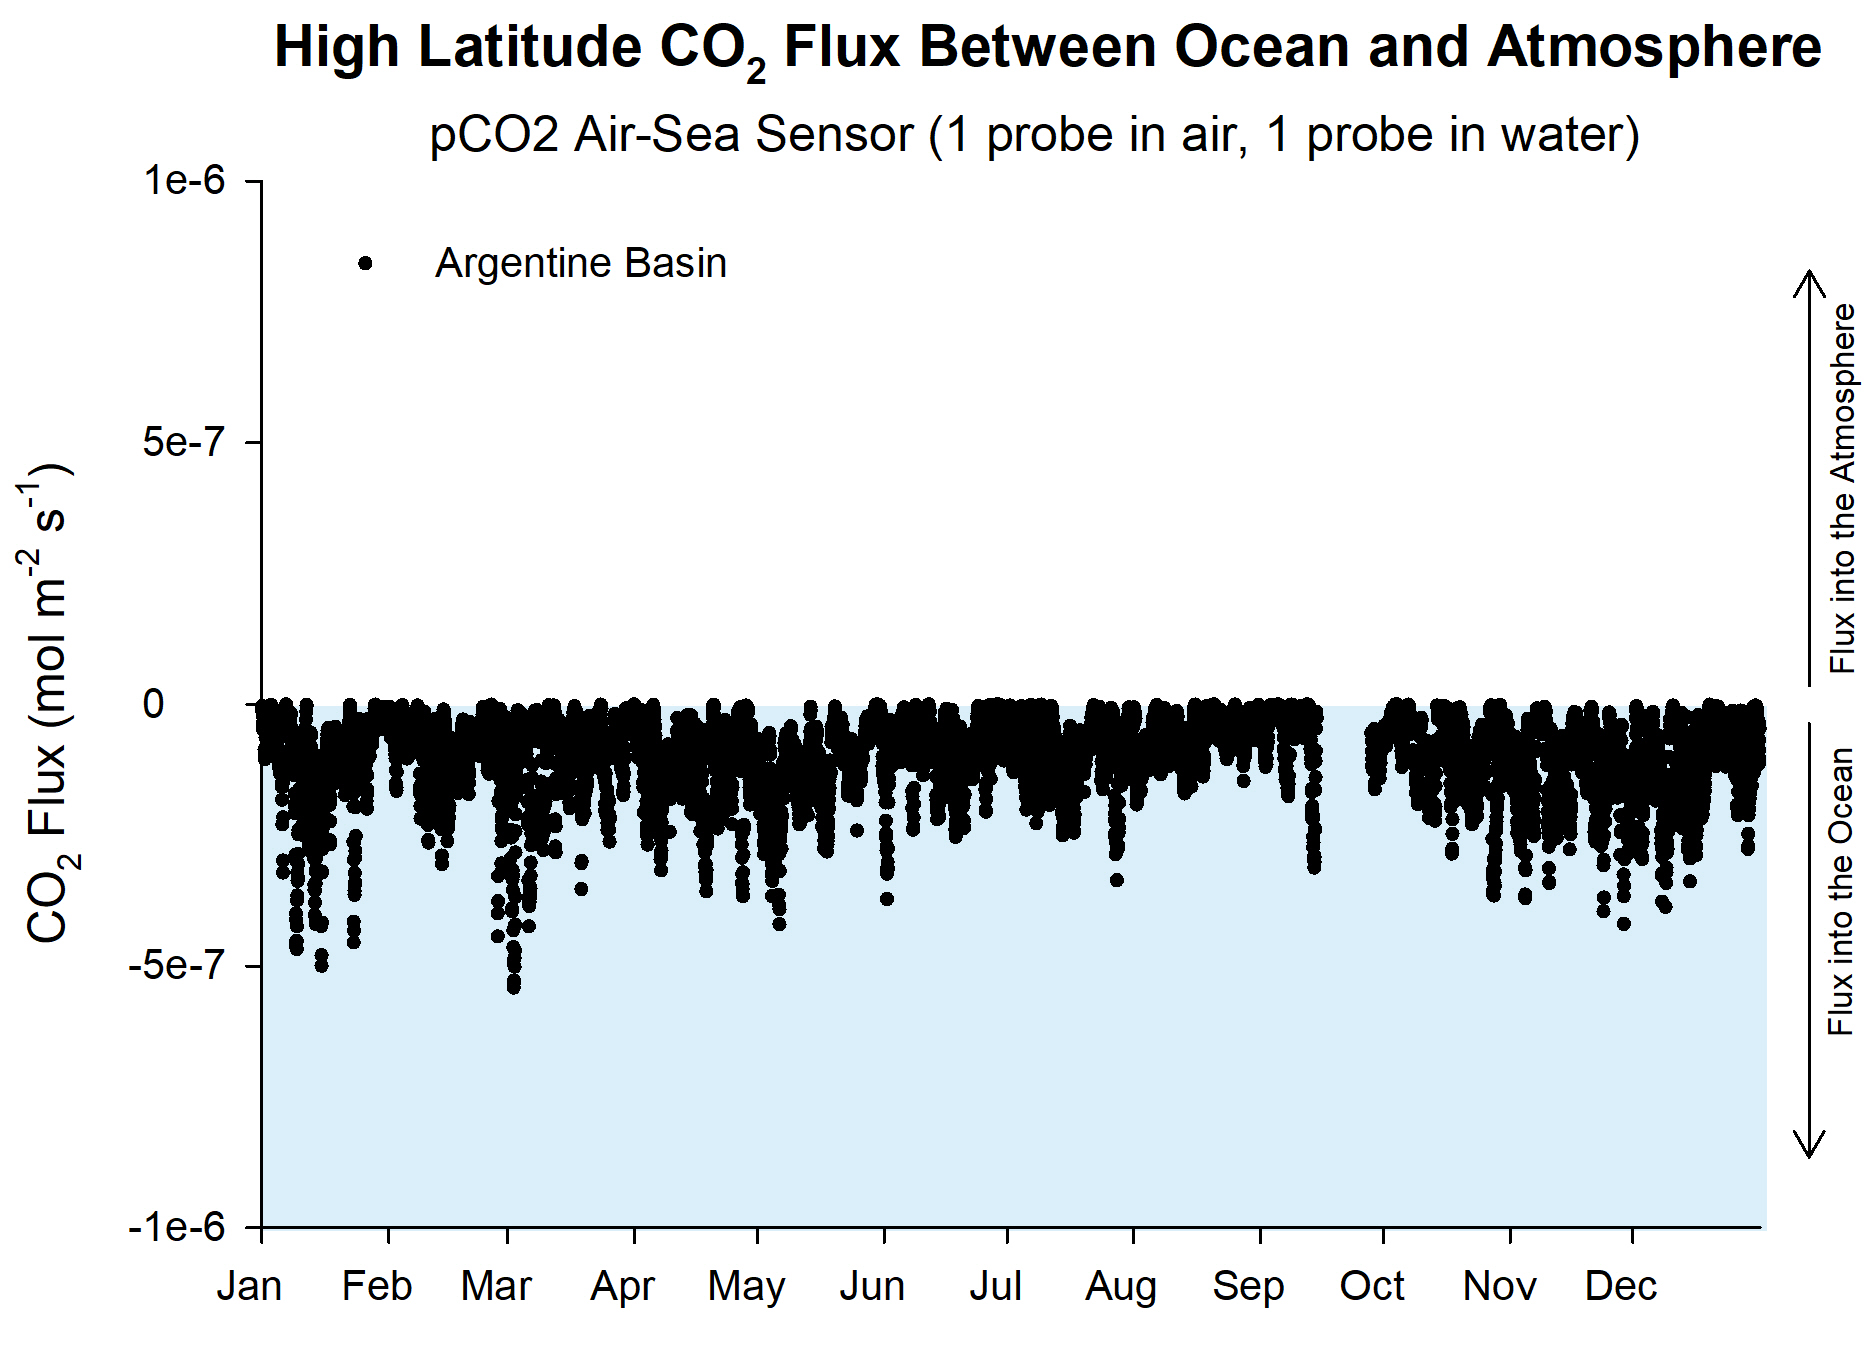 The High-latitude carbon dioxide flux between ocean and atmosphere graphic depicts CO2 air-sea gas exchange during 2016 at the Global Argentine Basin Array in the SW Atlantic. Throughout the entire year, there is no outgassing — or CO2 release from the ocean into the atmosphere. There is only CO2 absorption — a net flux of CO2 from the atmosphere into the ocean due in part to the colder ocean waters.